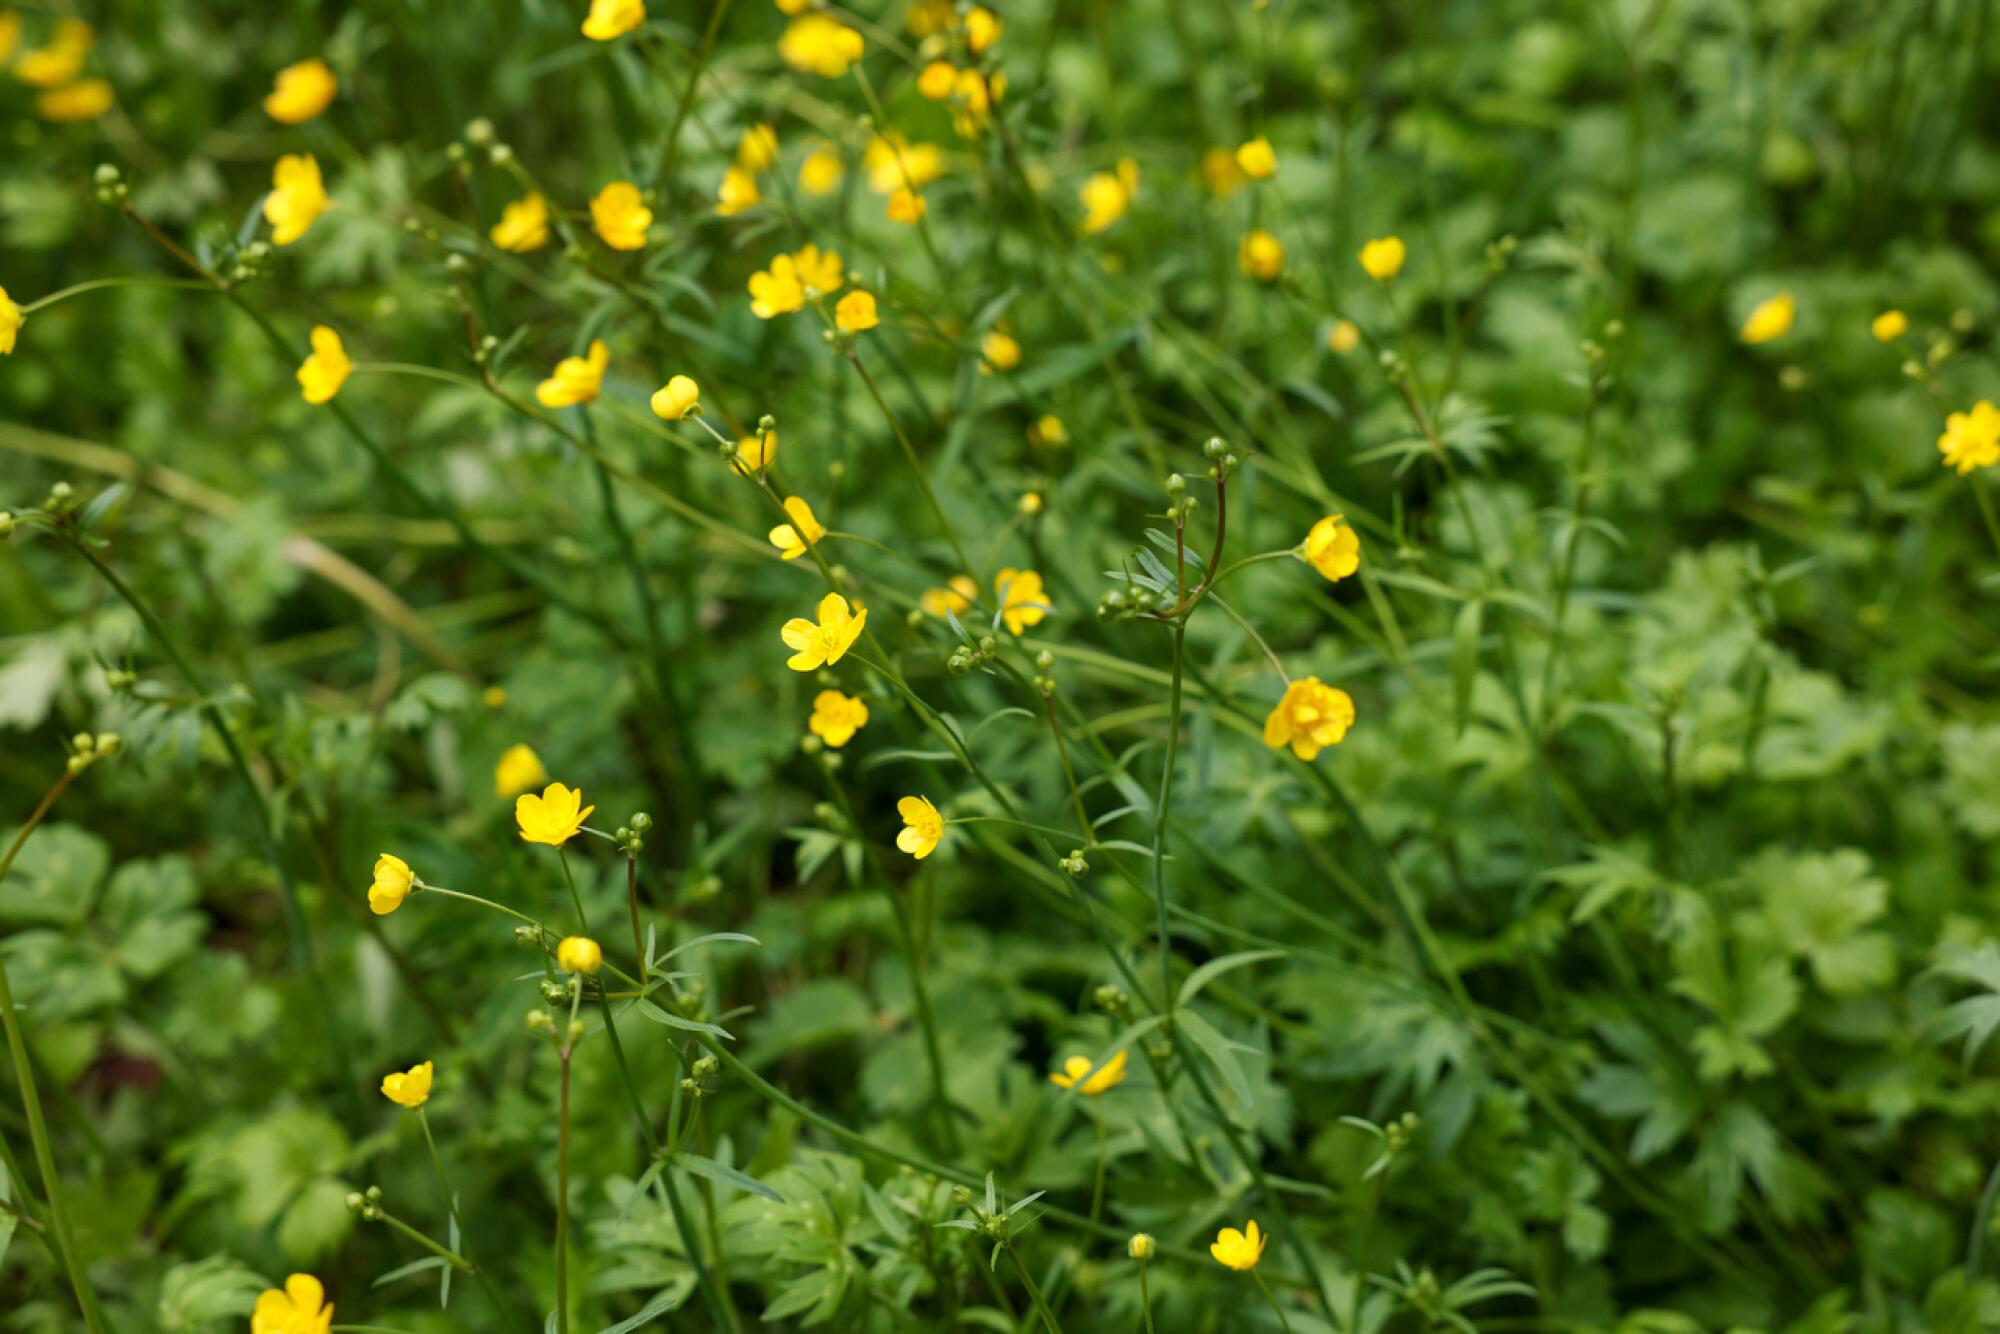 Small yellow flowers on tall erect stems rise above deep green foliage of California buttercups